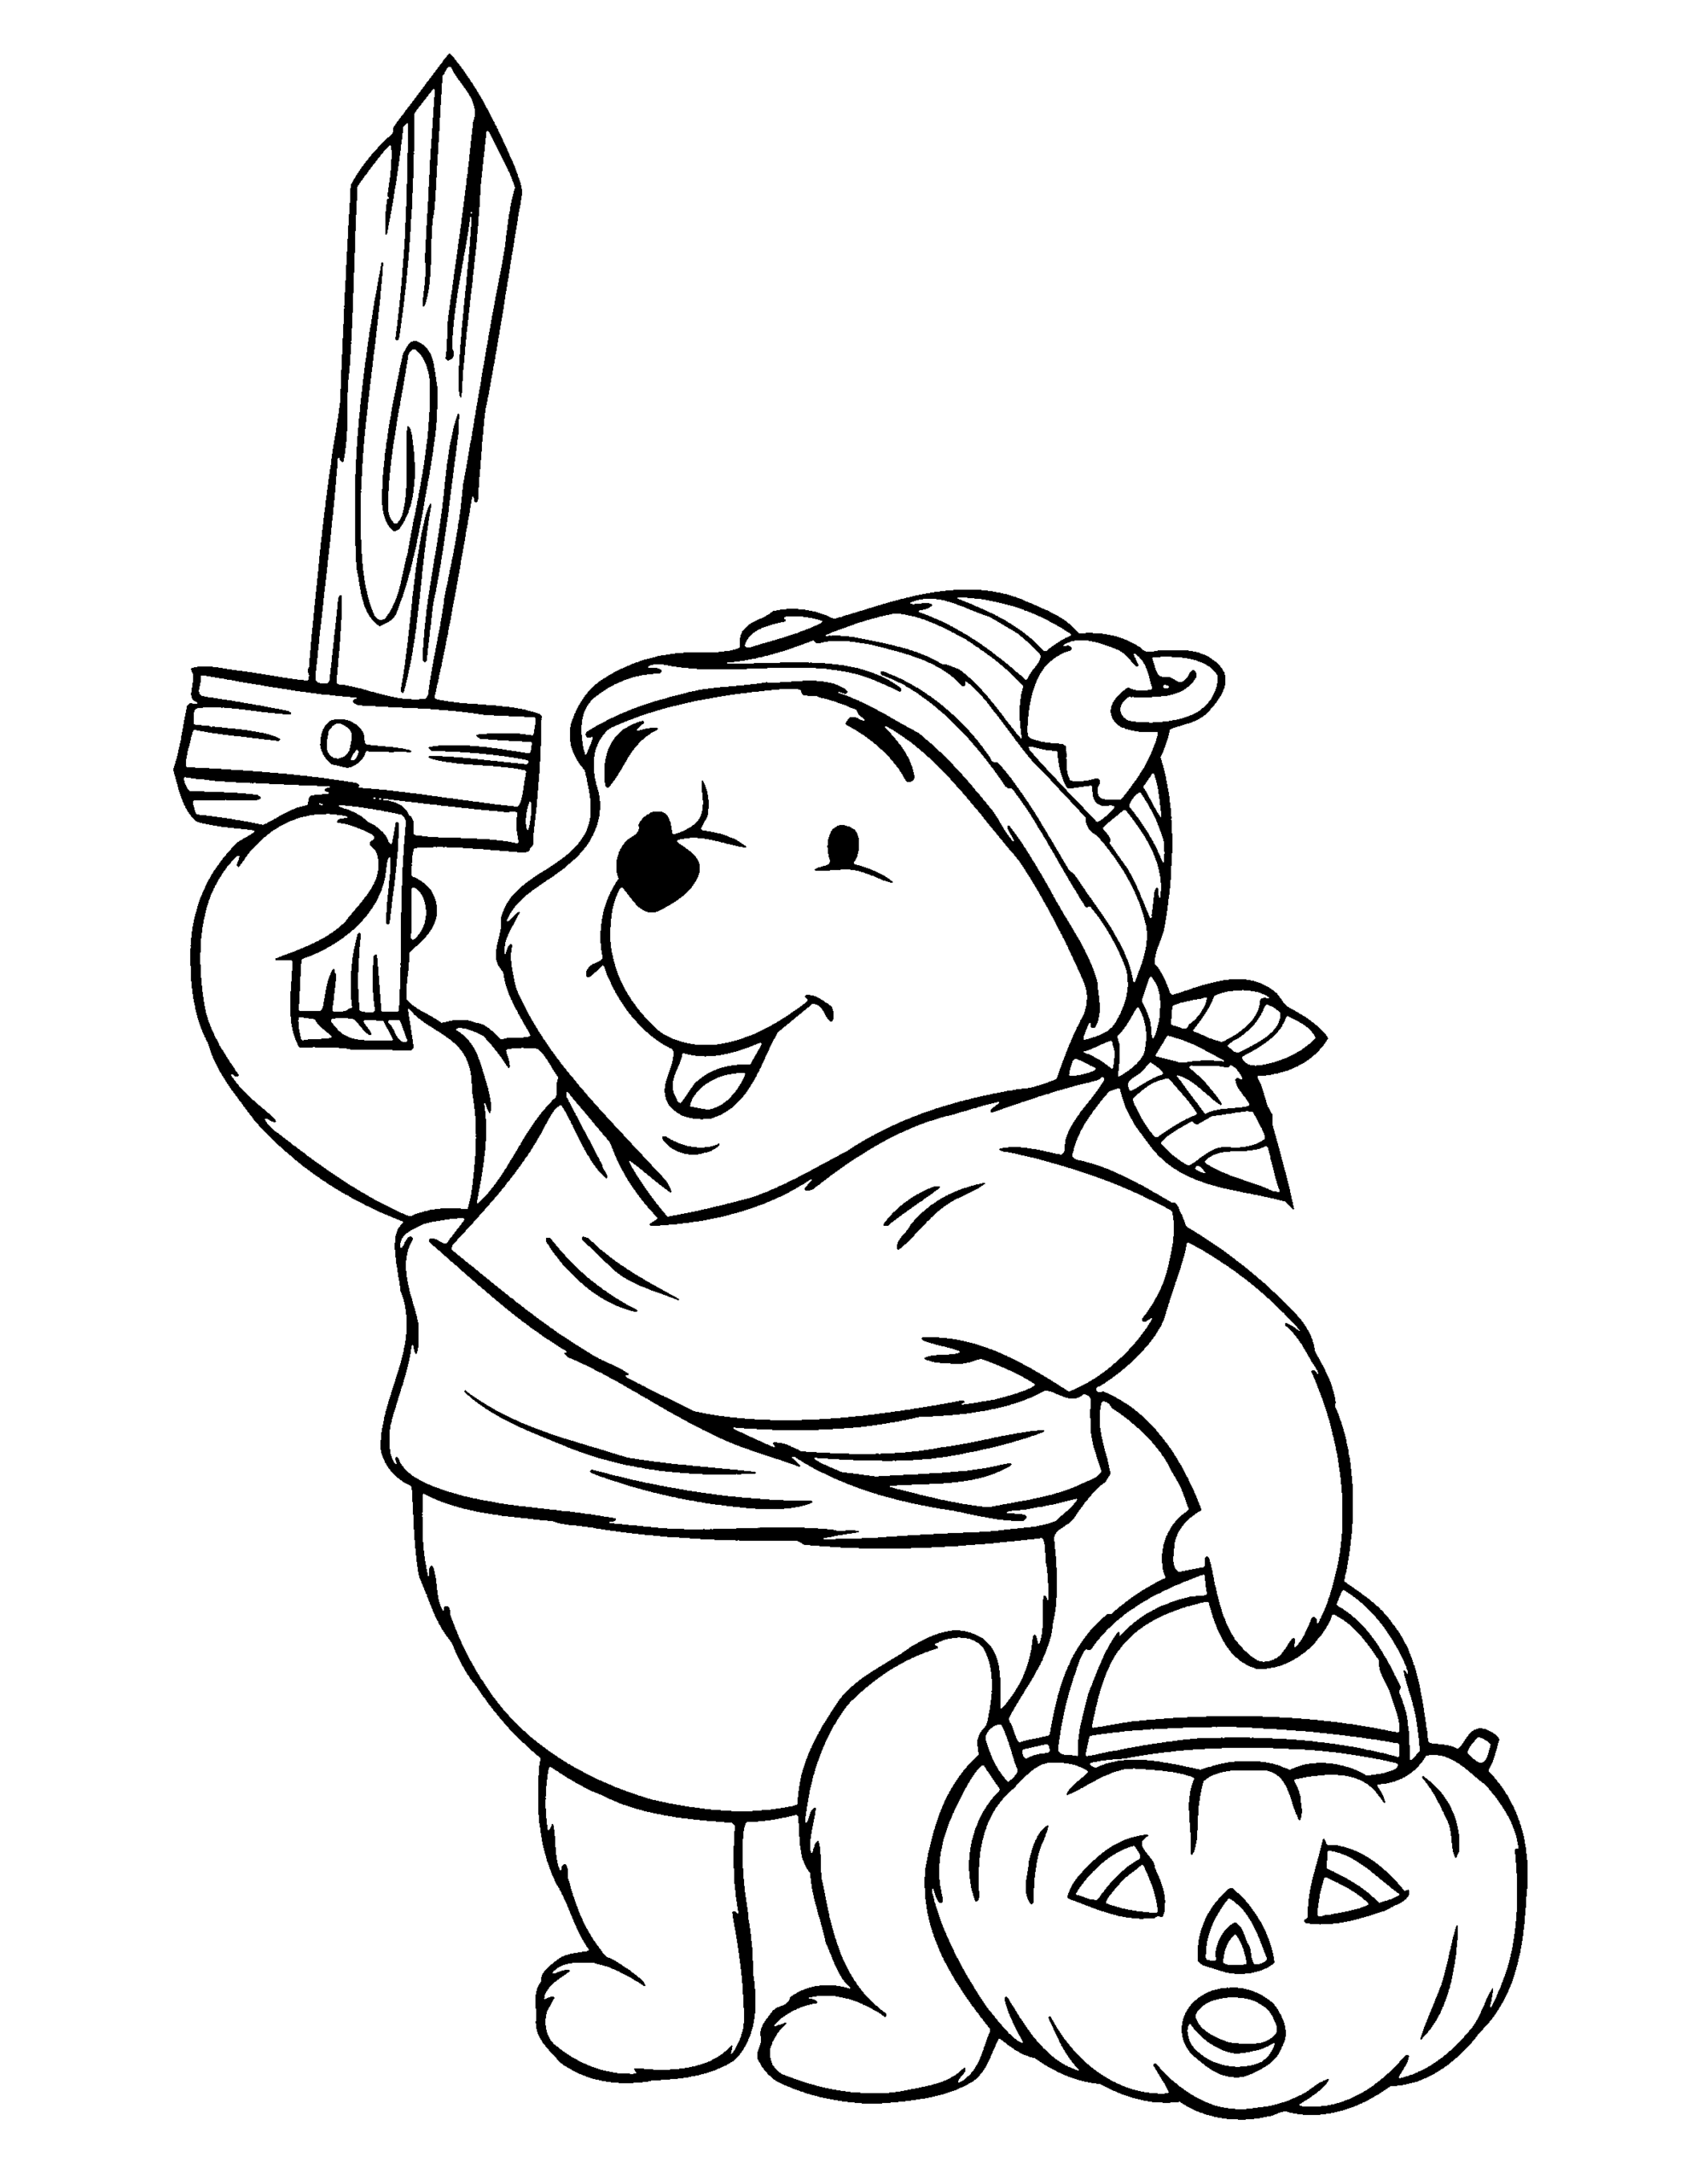 Winnie the Pooh Coloring Pages Cartoons winnie the pooh 42 Printable 2020 7149 Coloring4free